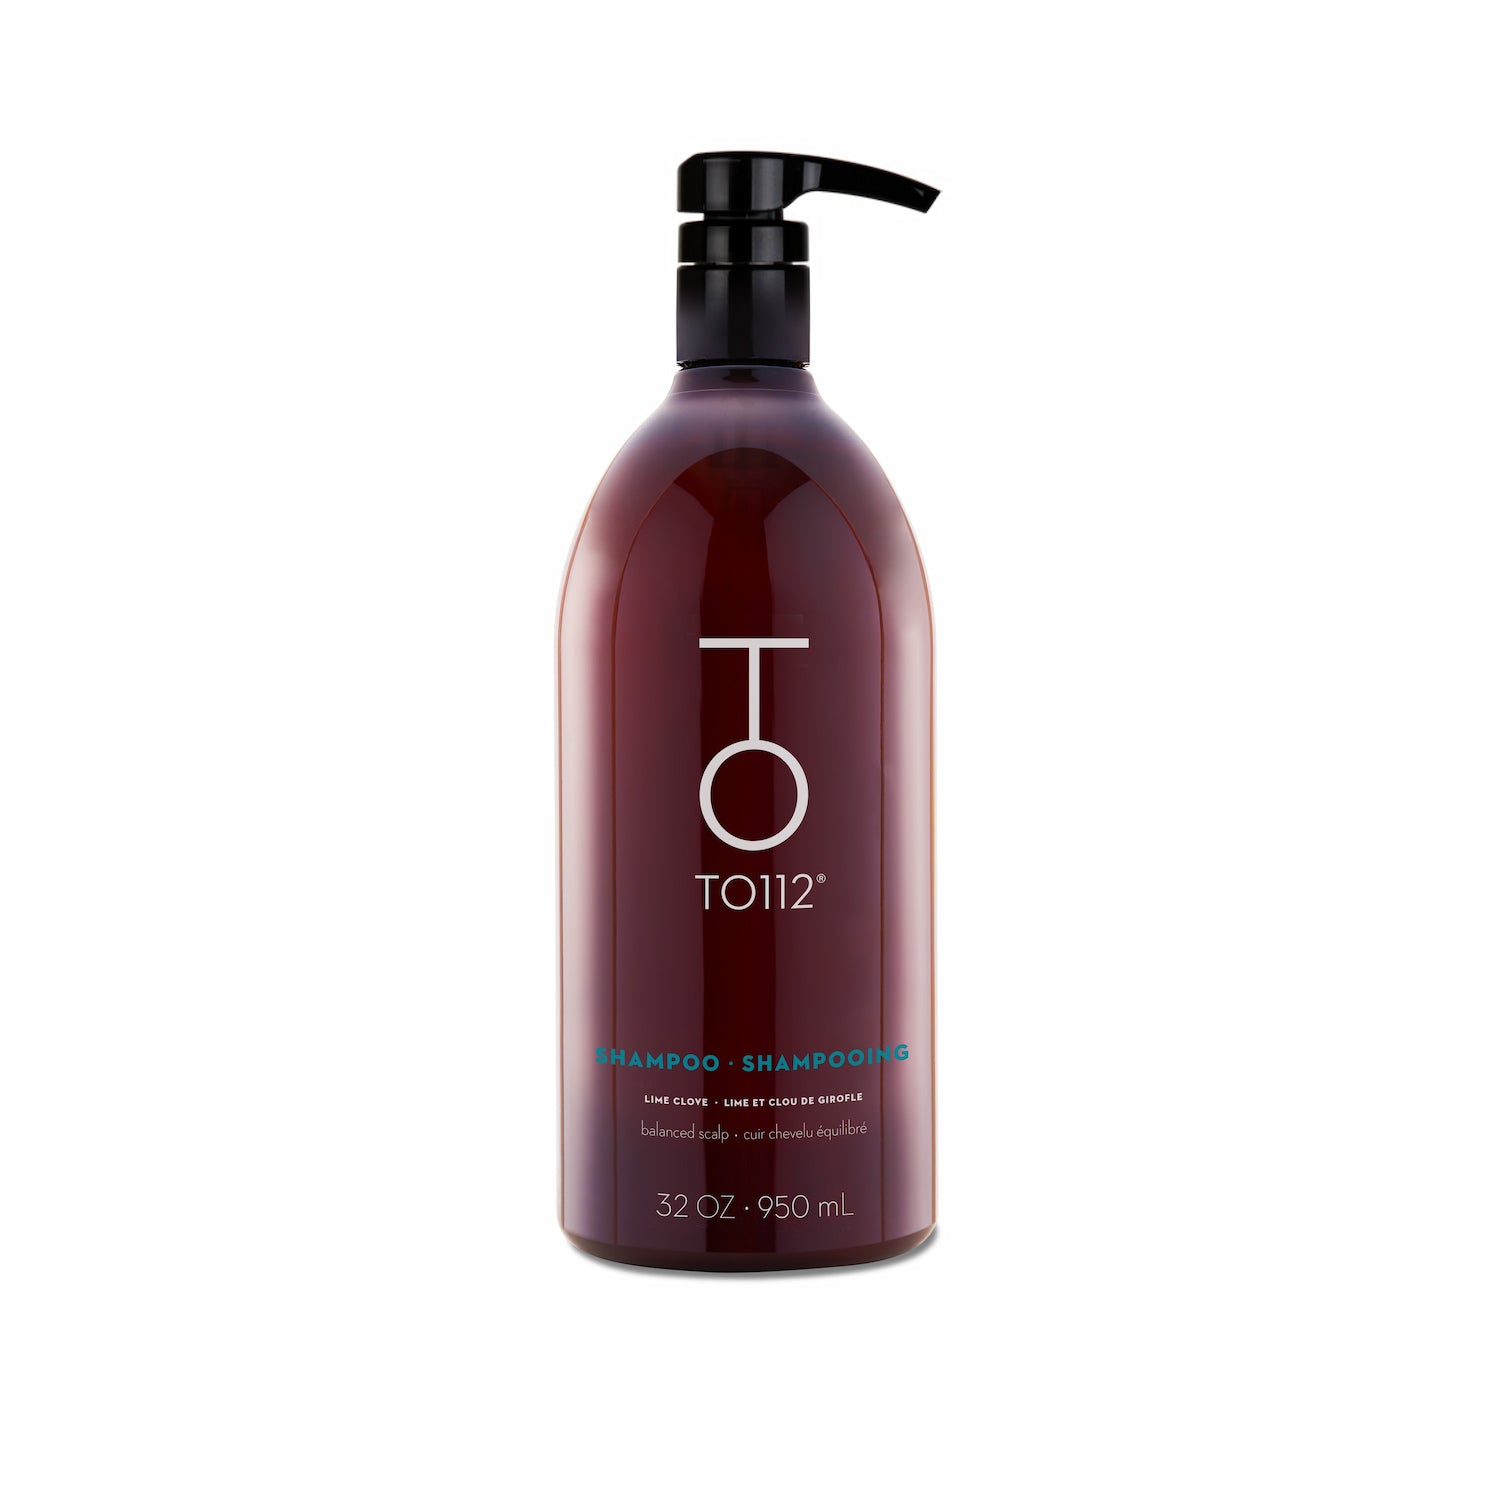 TO112 Shampoo for Normal Hair & Balanced Scalps 32oz size